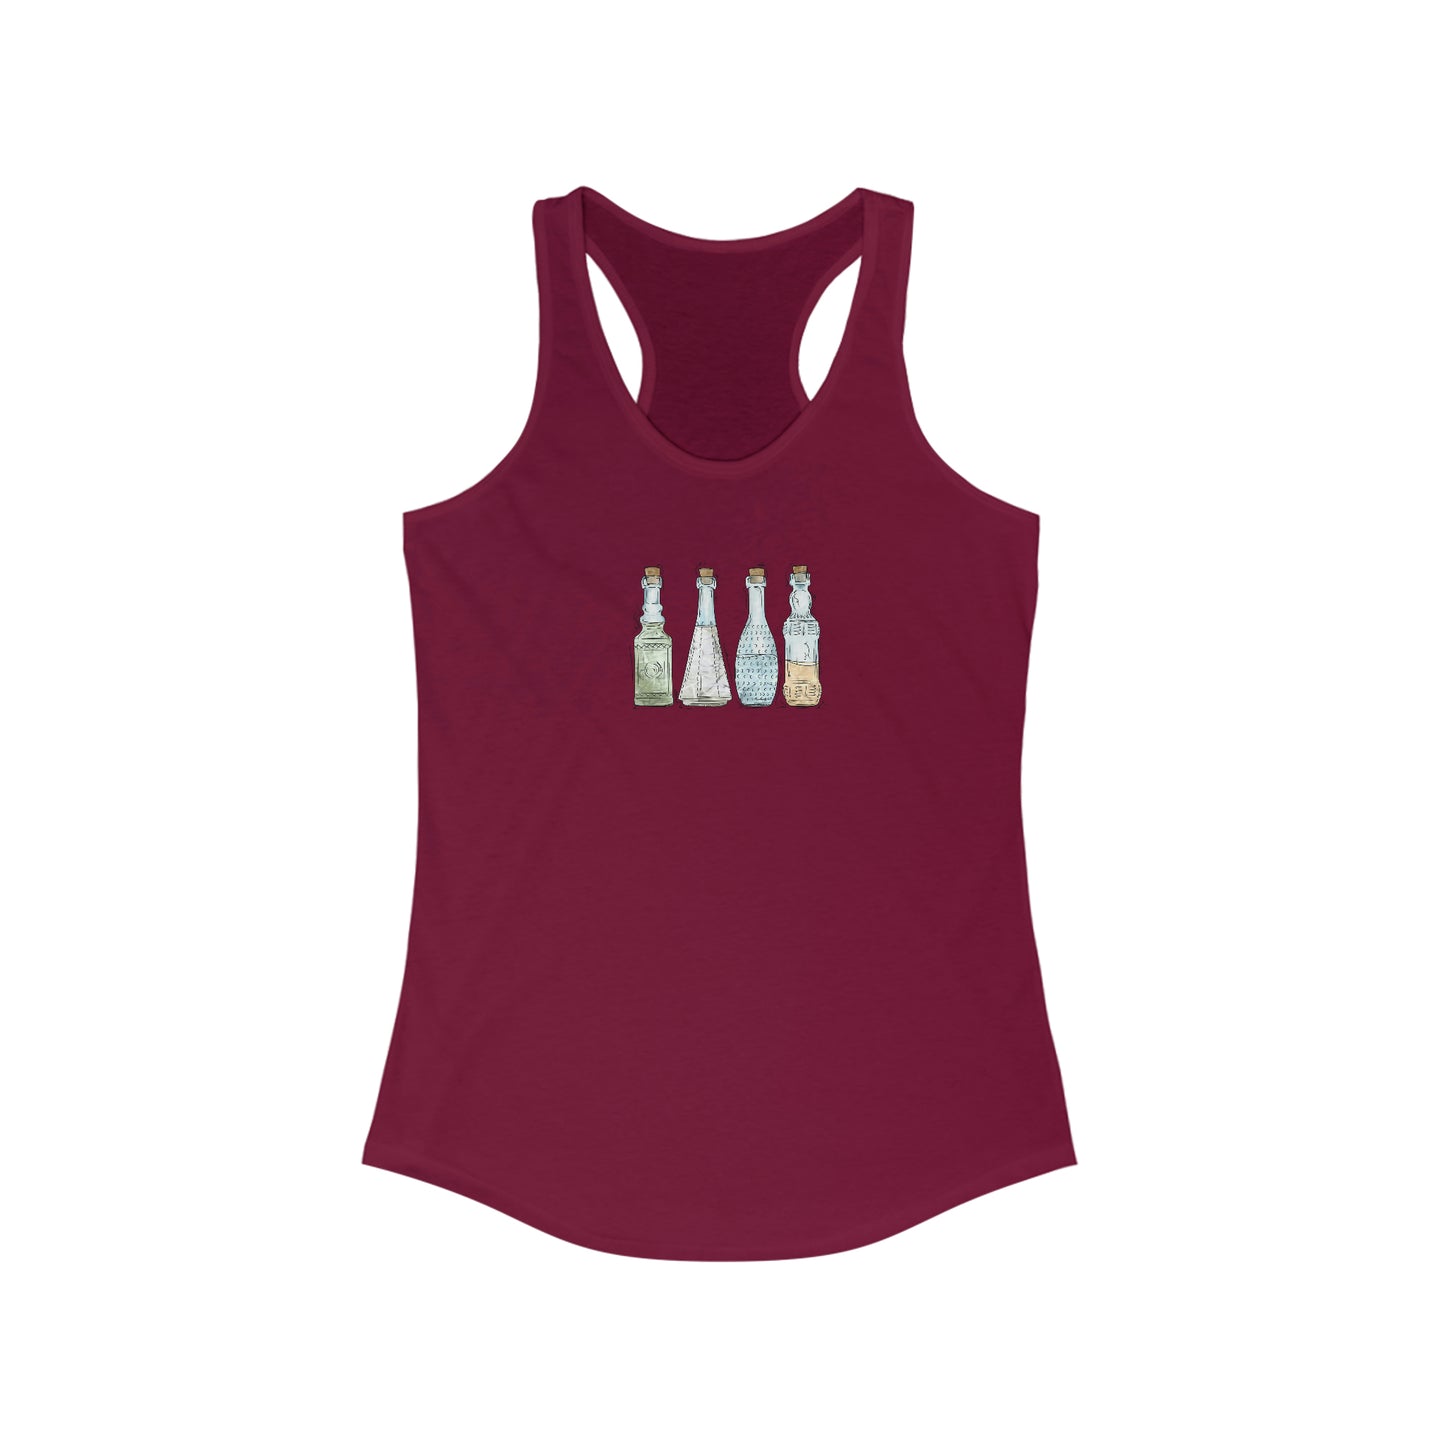 Unlabeled Pride Potion Bottles - Womens Tank Top